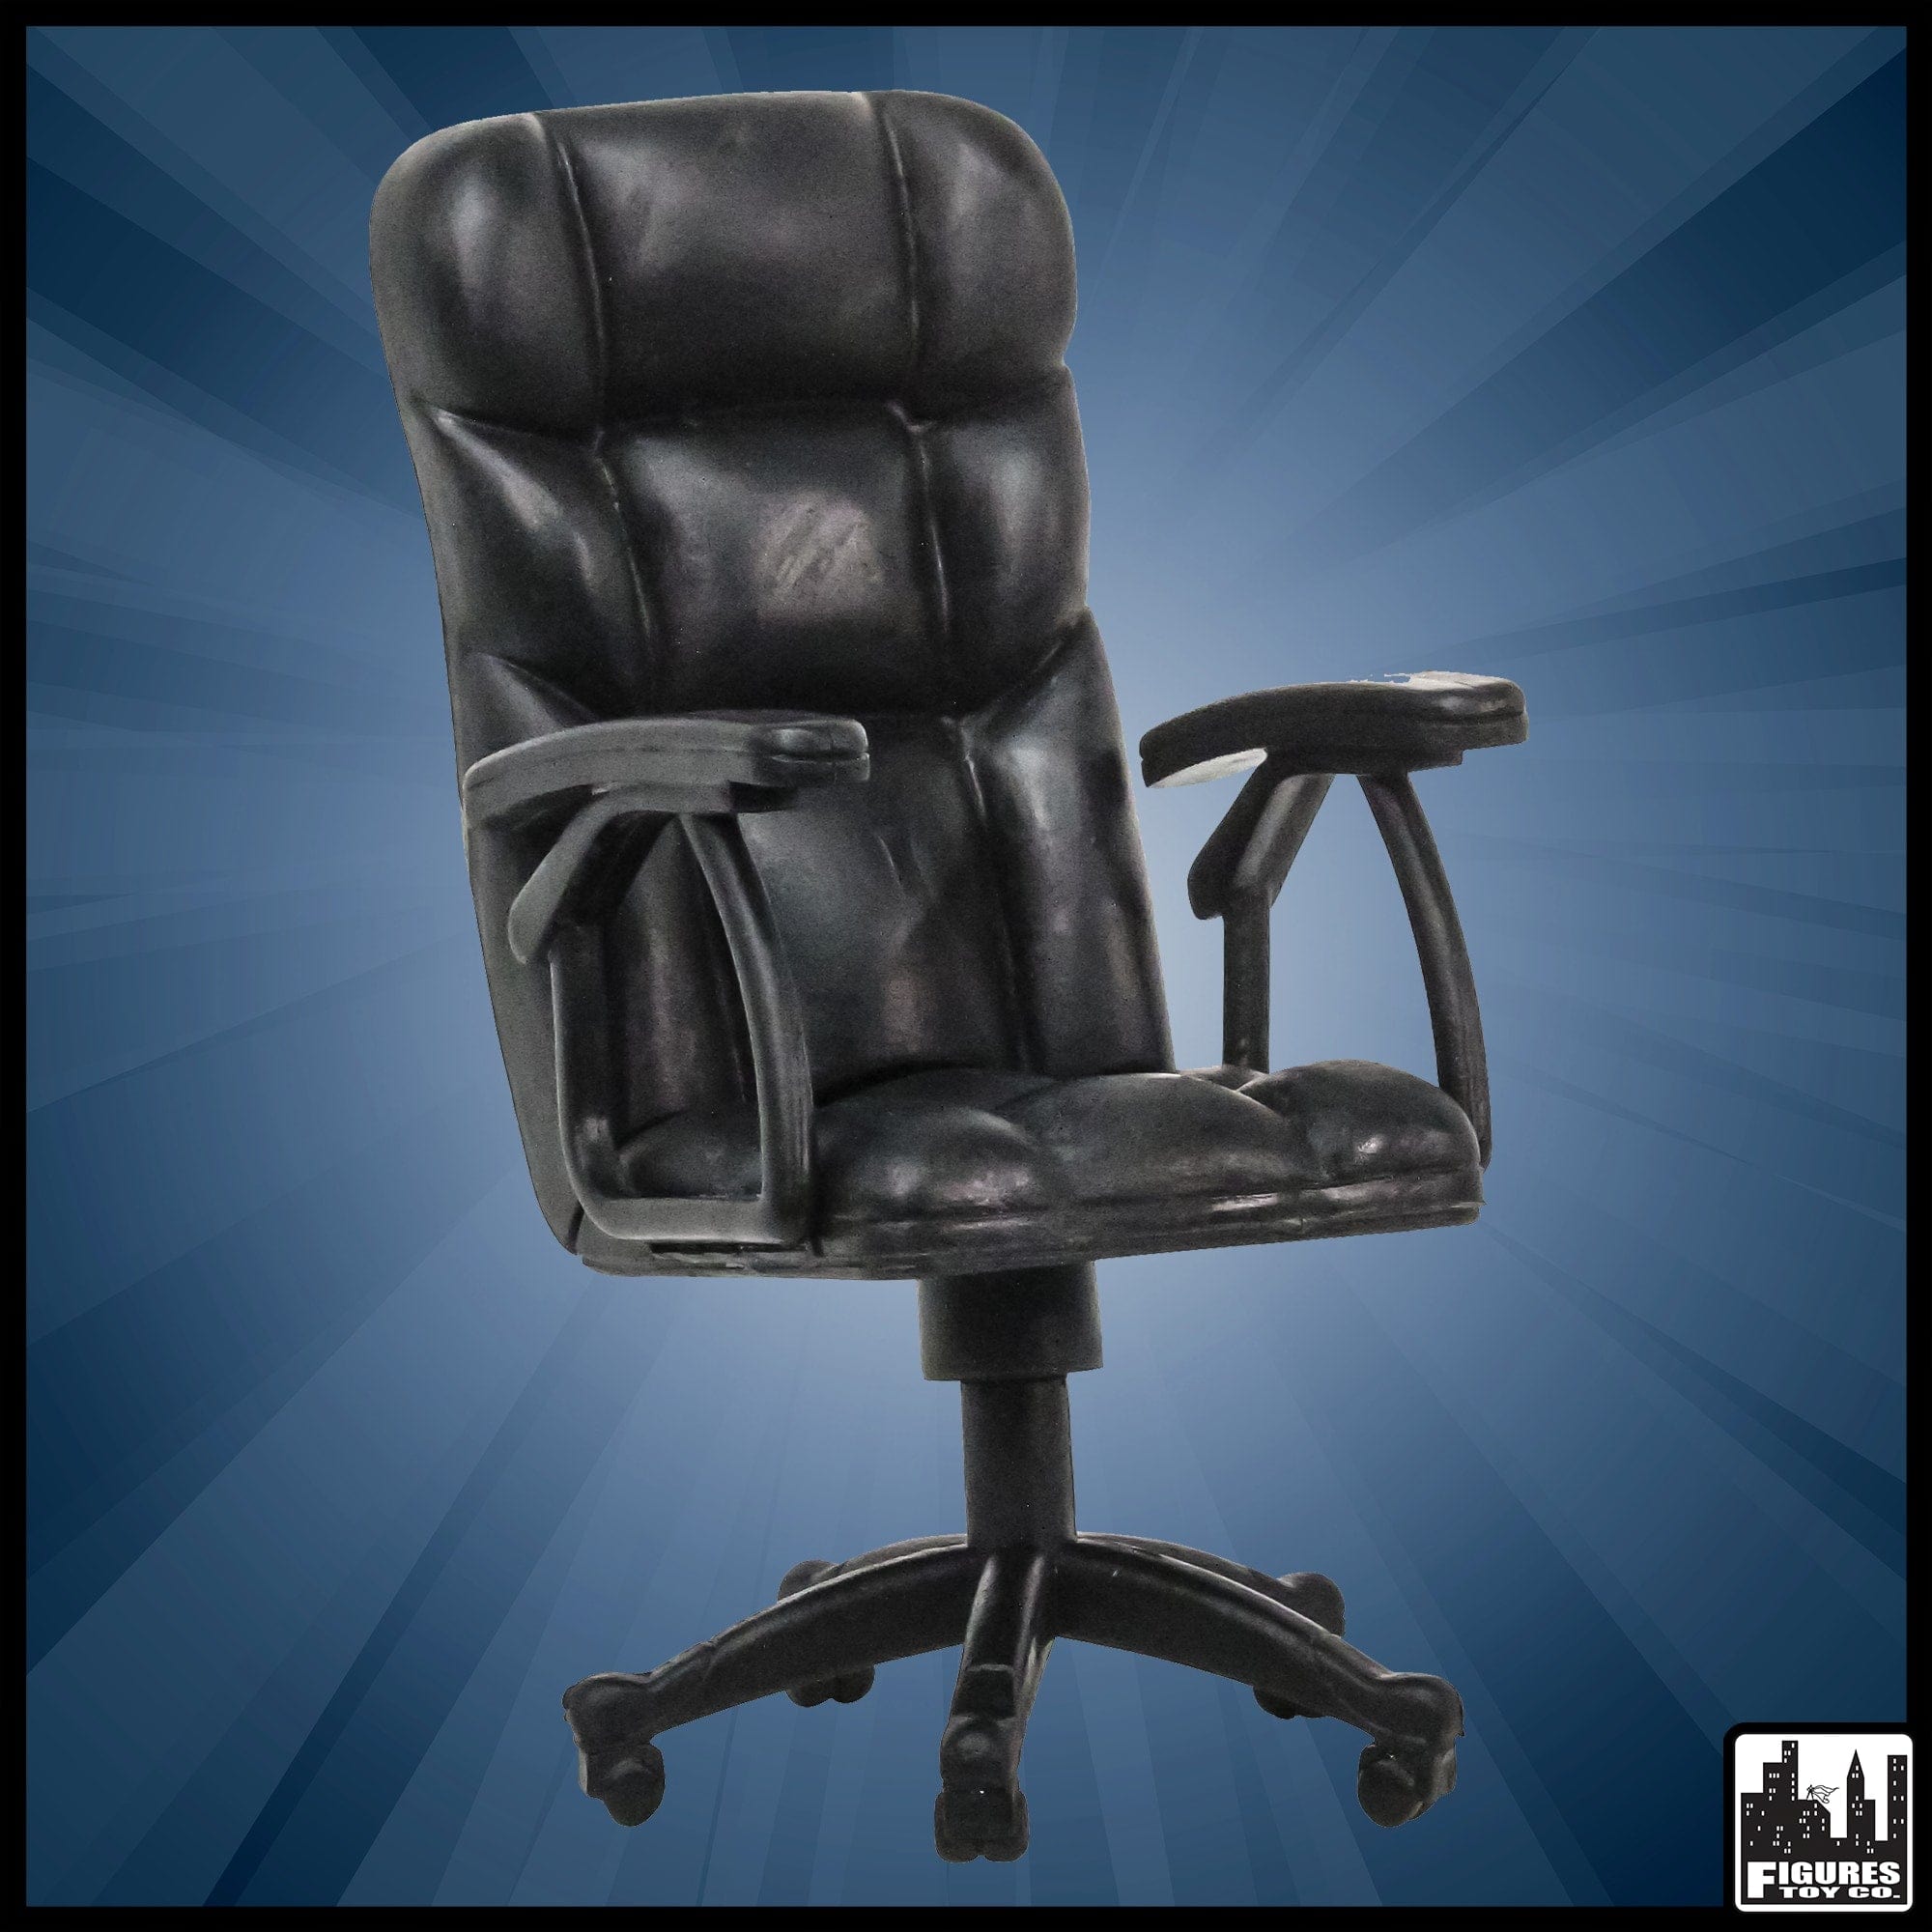 Plastic Toy Breakable Office Chair for WWE Wrestling Action Figures